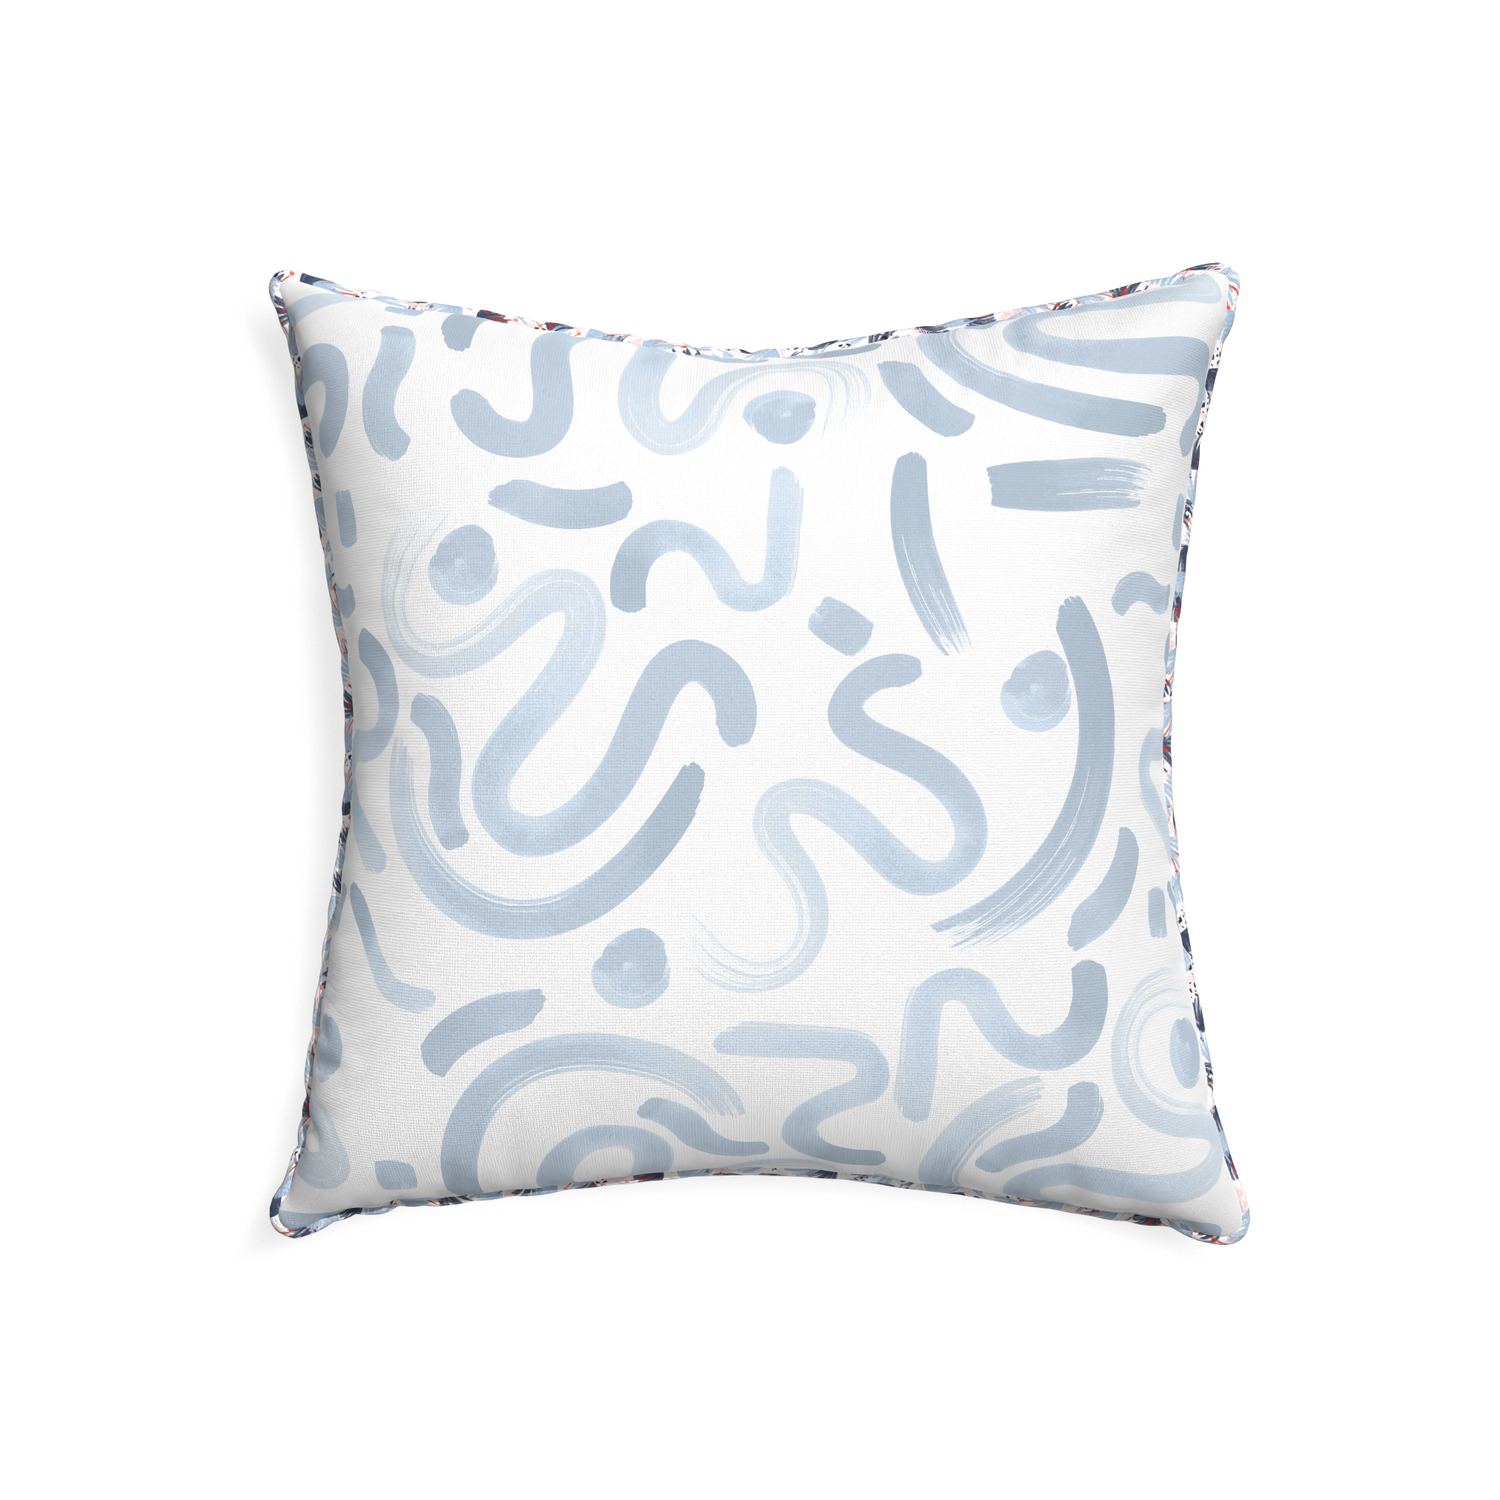 22-square hockney sky custom pillow with e piping on white background